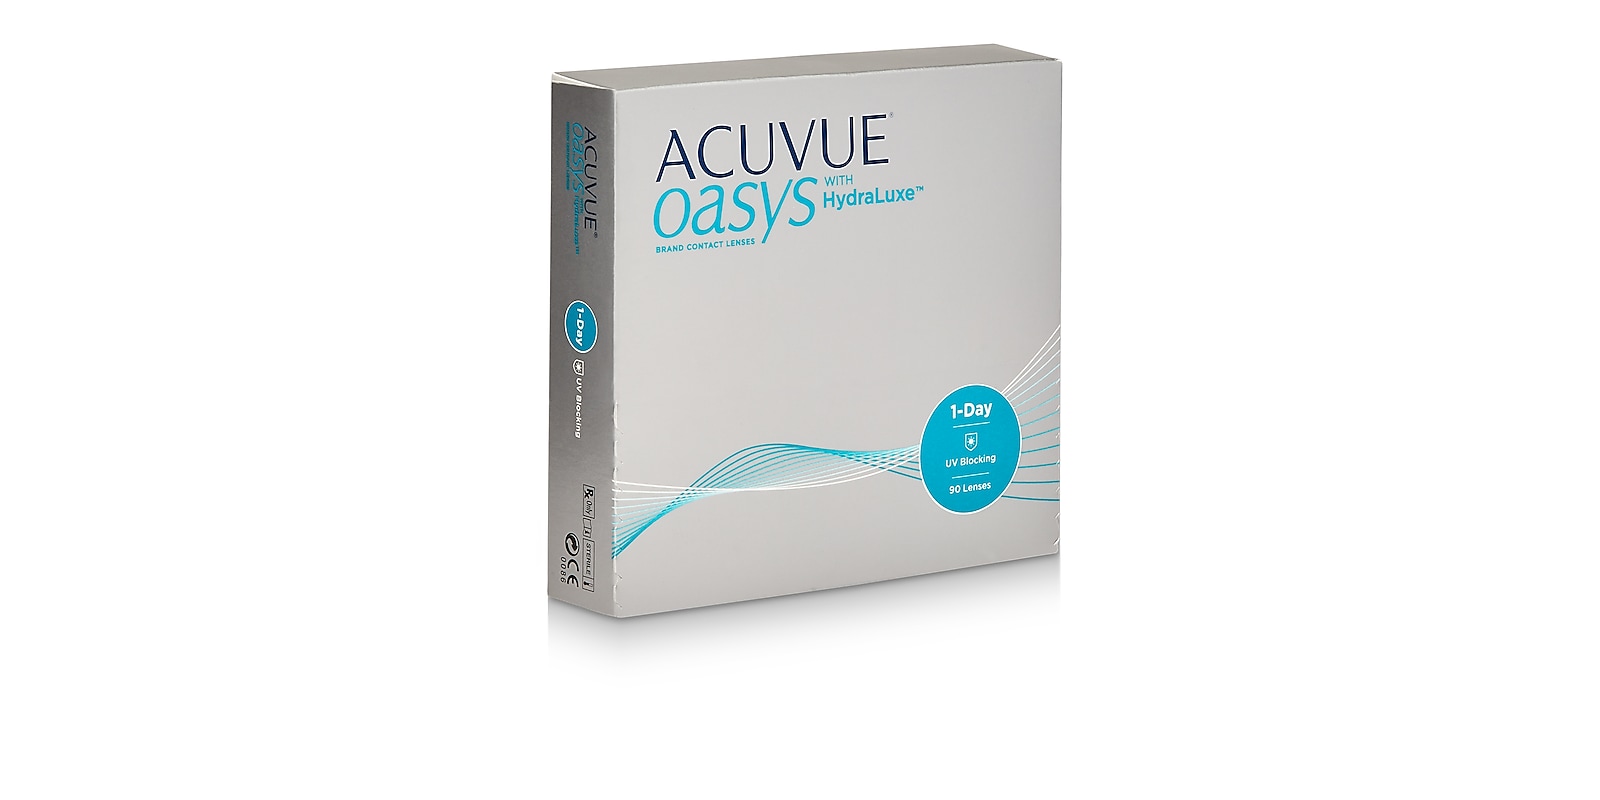 Acuvue Oasys® 1-Day with HydraLuxe™ Technology, 90 pack contact lenses